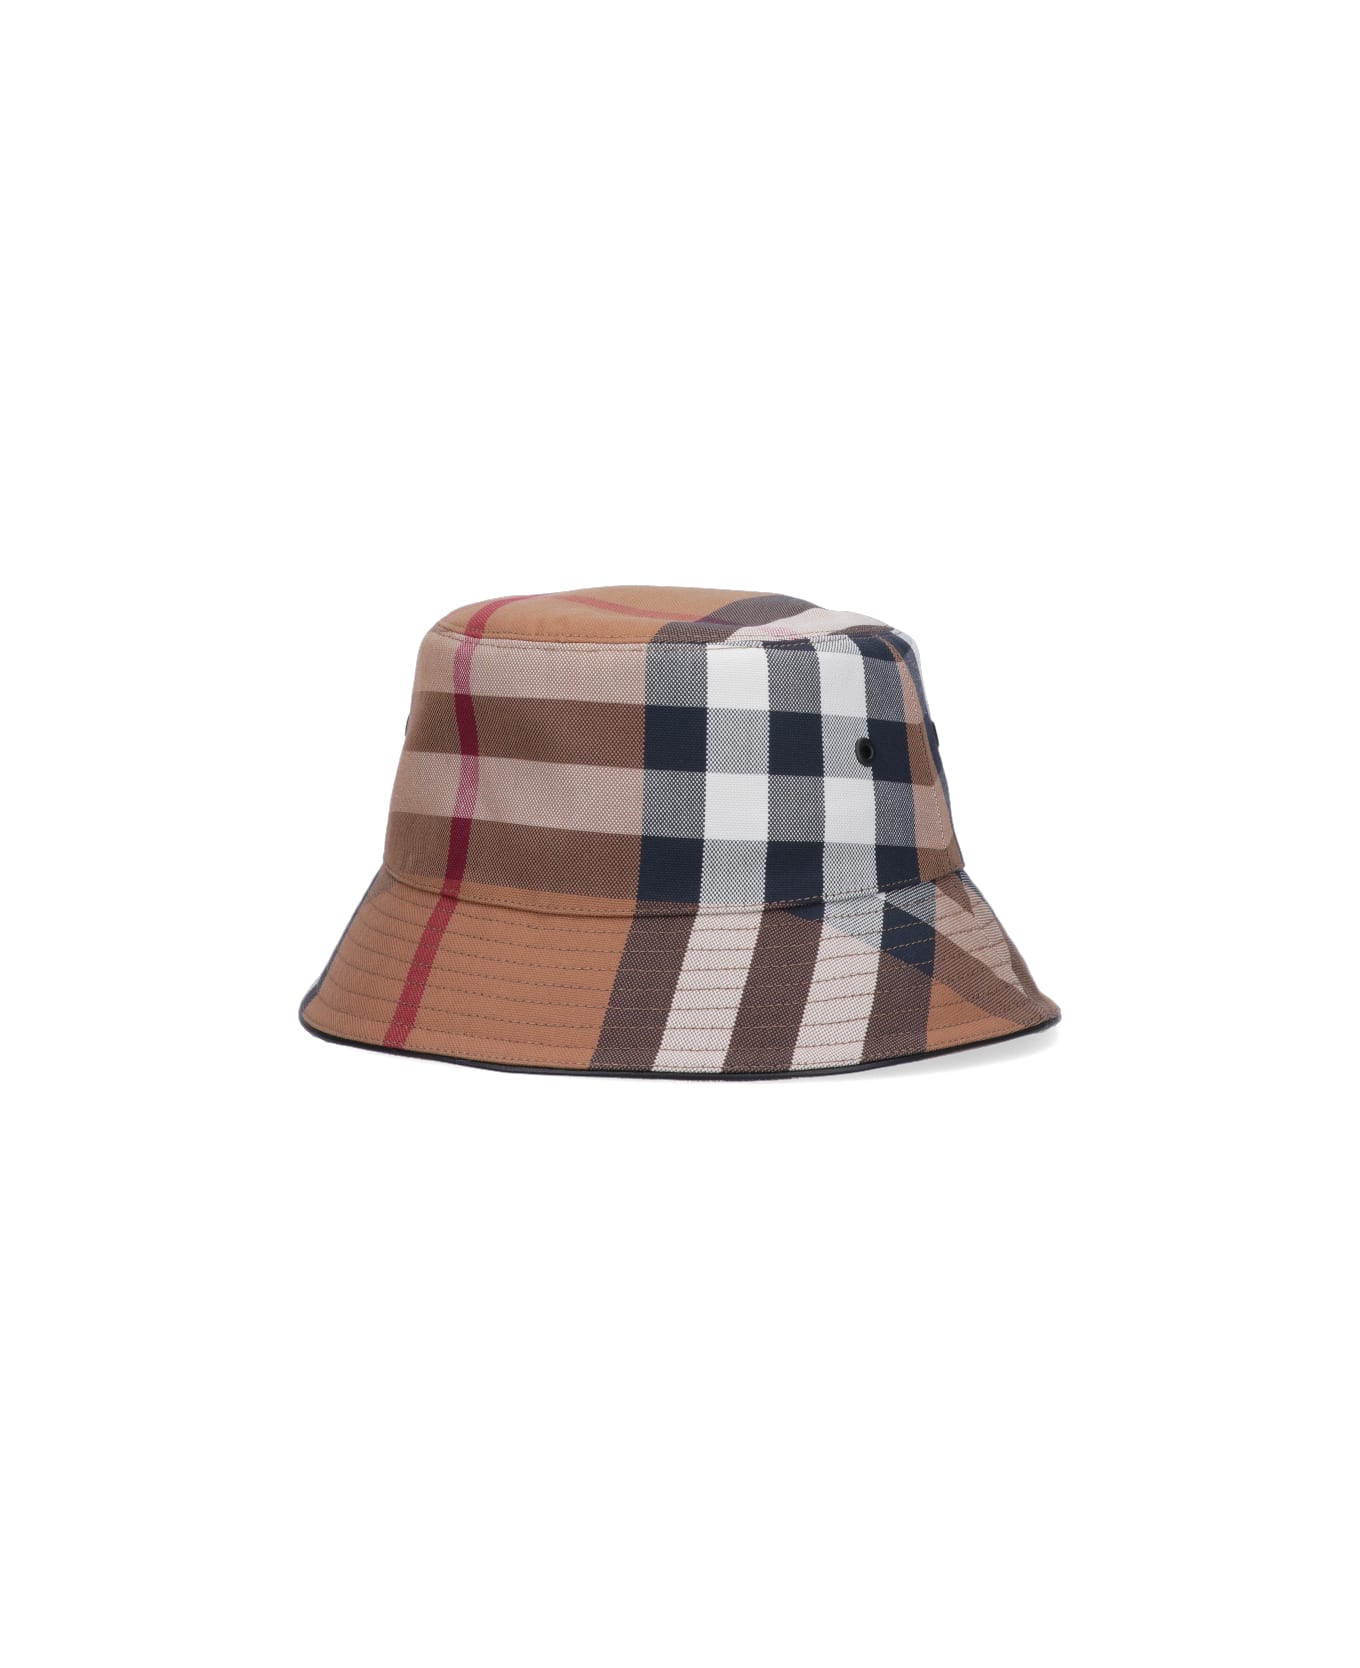 Burberry Check Bucket Hat - Brown